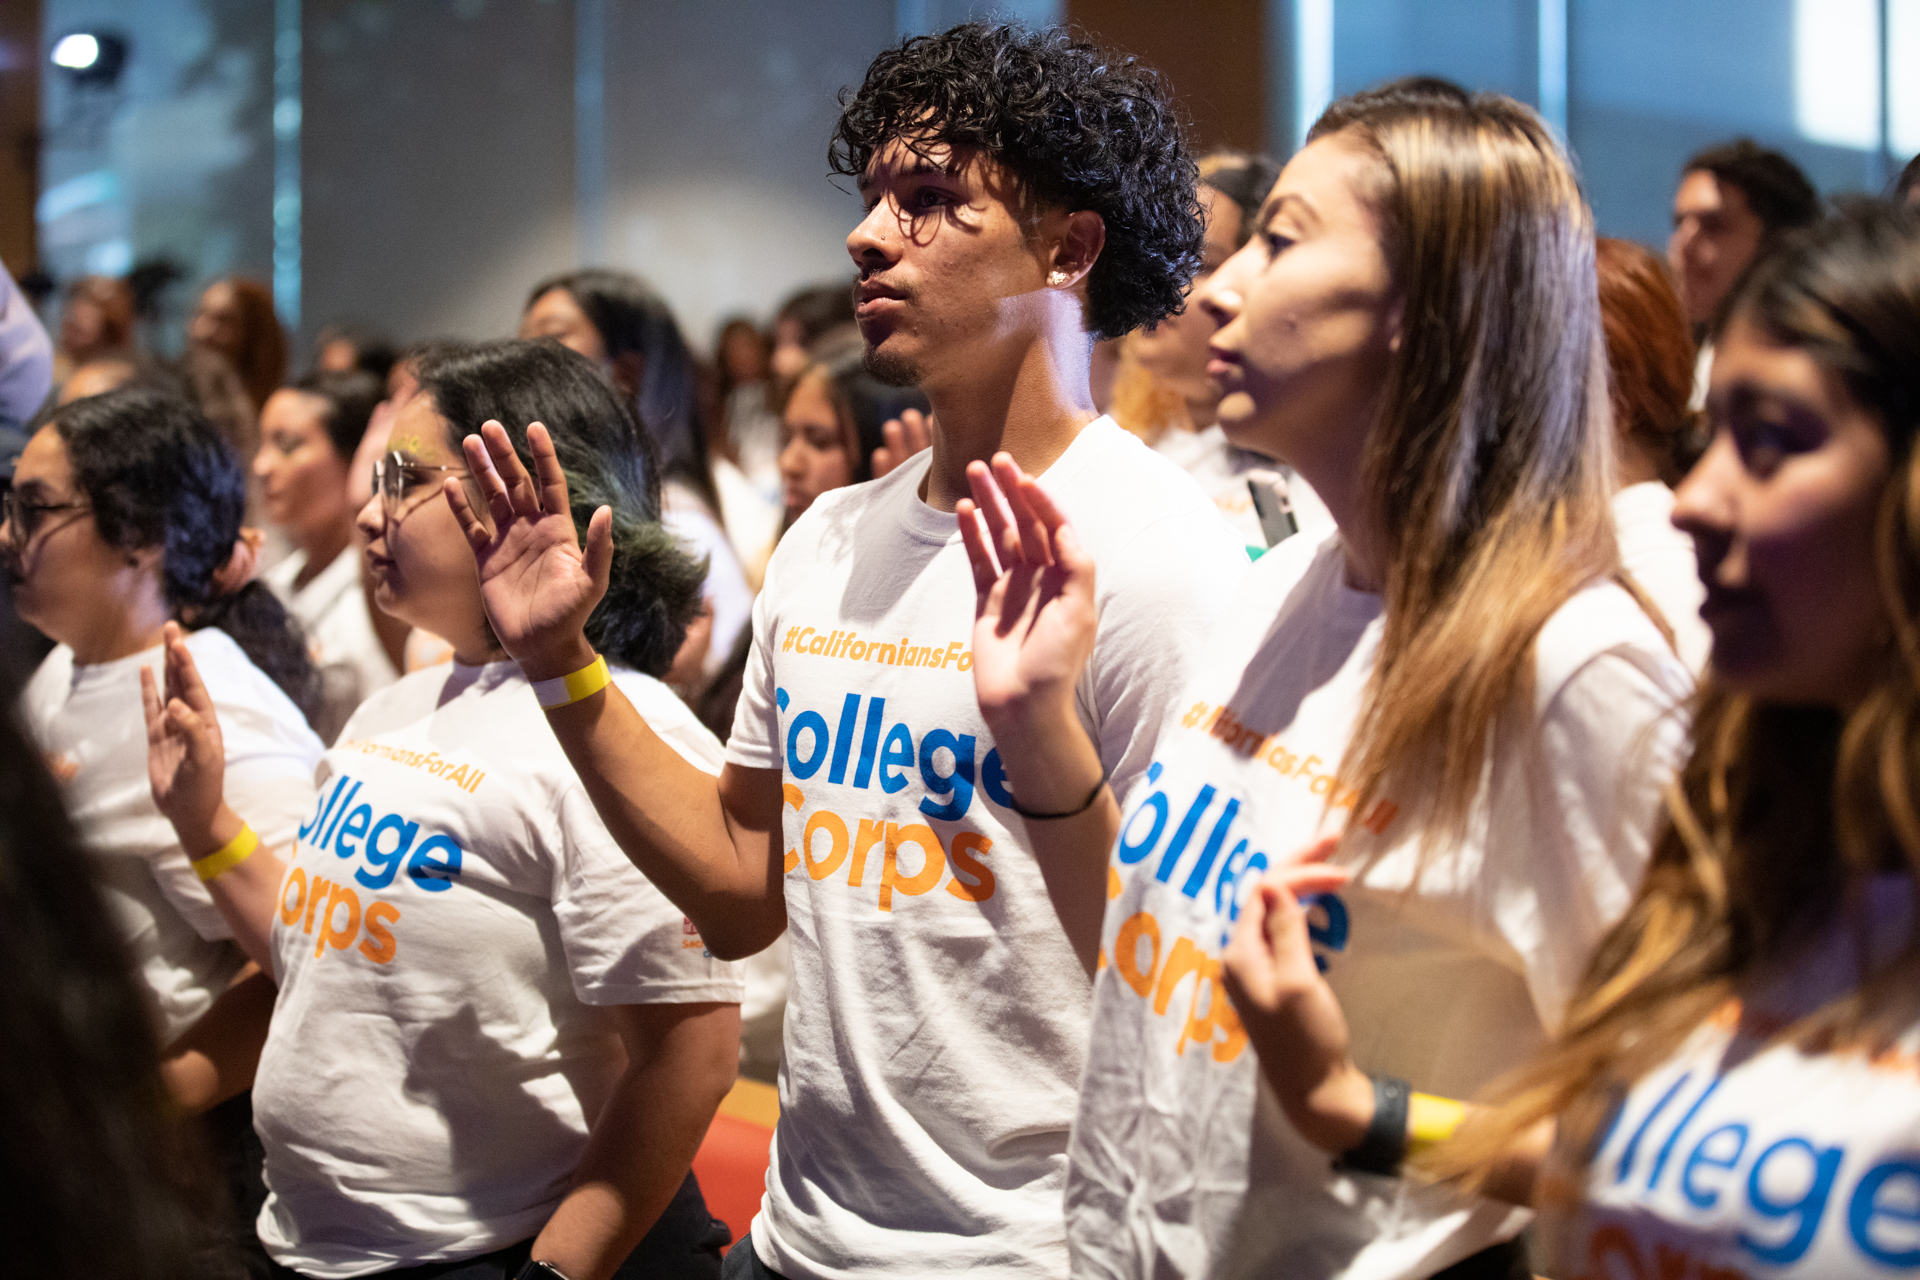 Members of College Corps attend an event in their branded T-shirts.